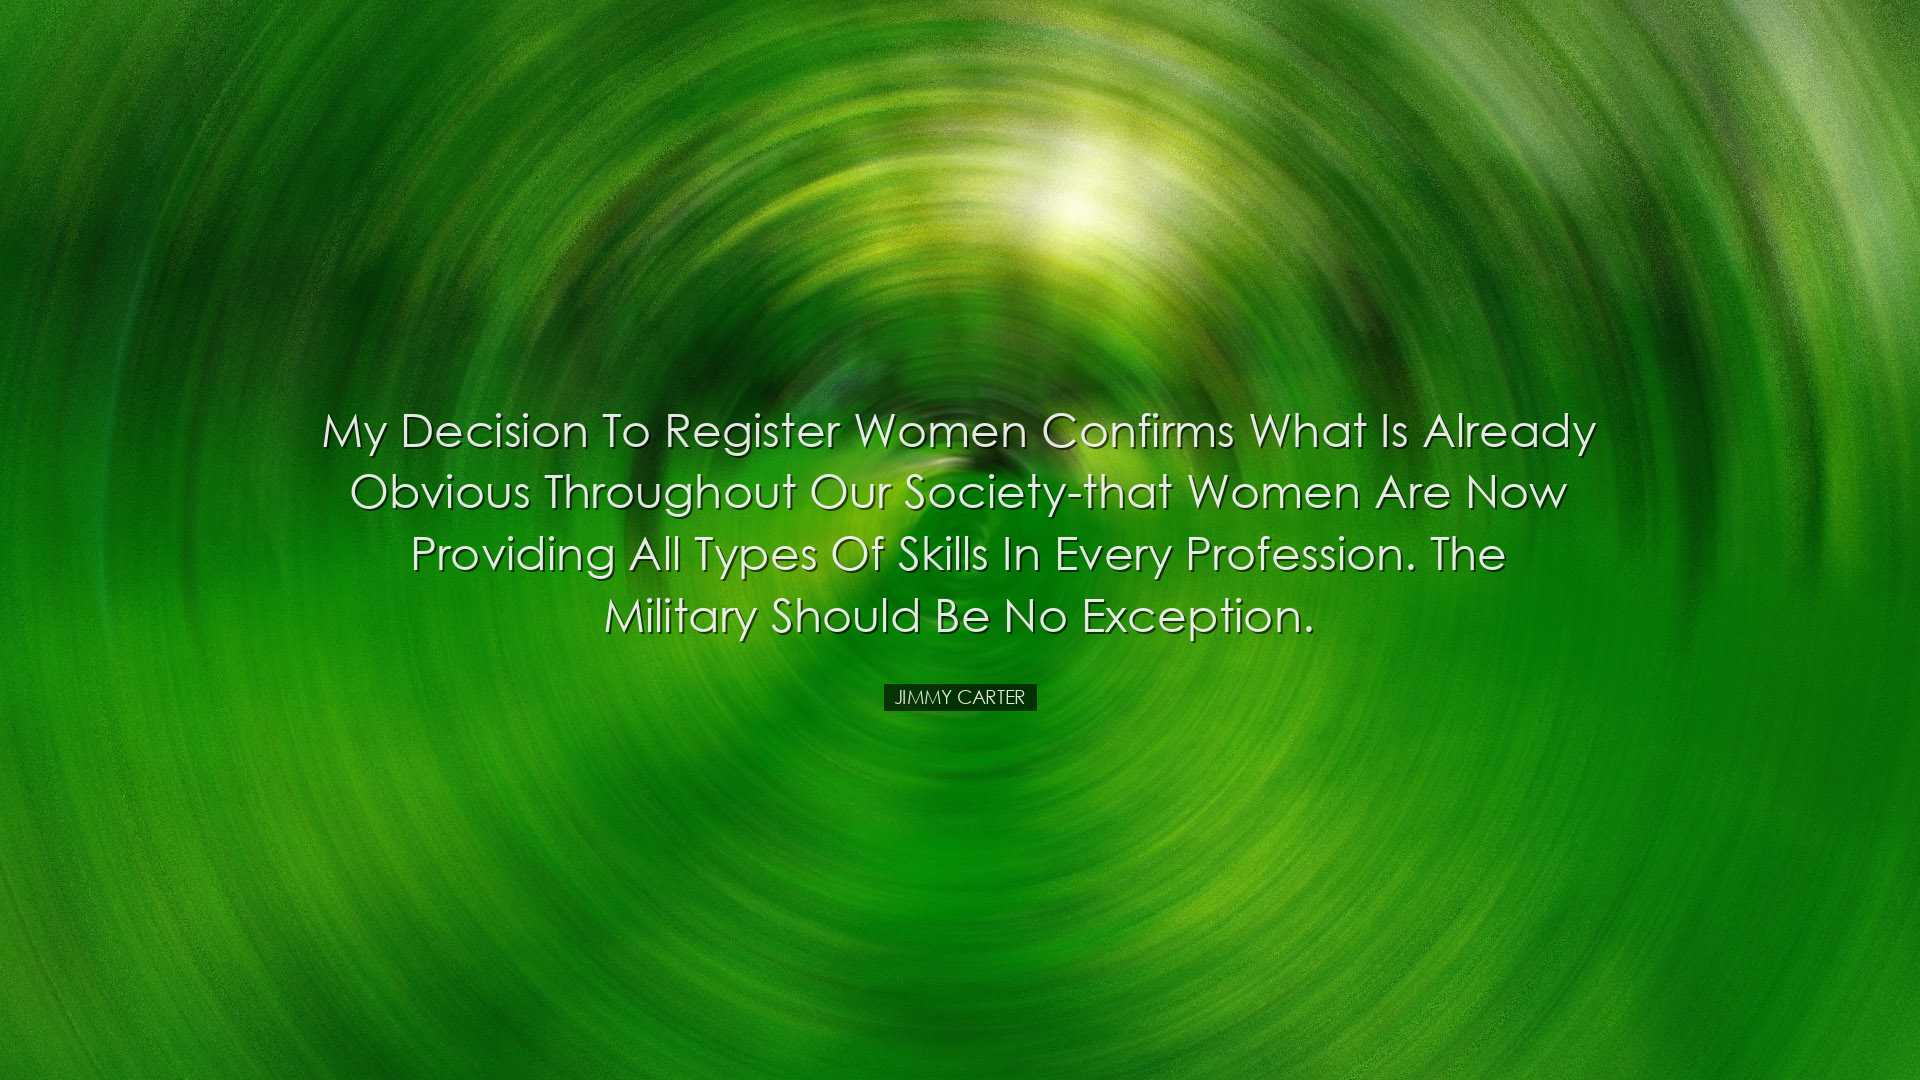 My decision to register women confirms what is already obvious thr